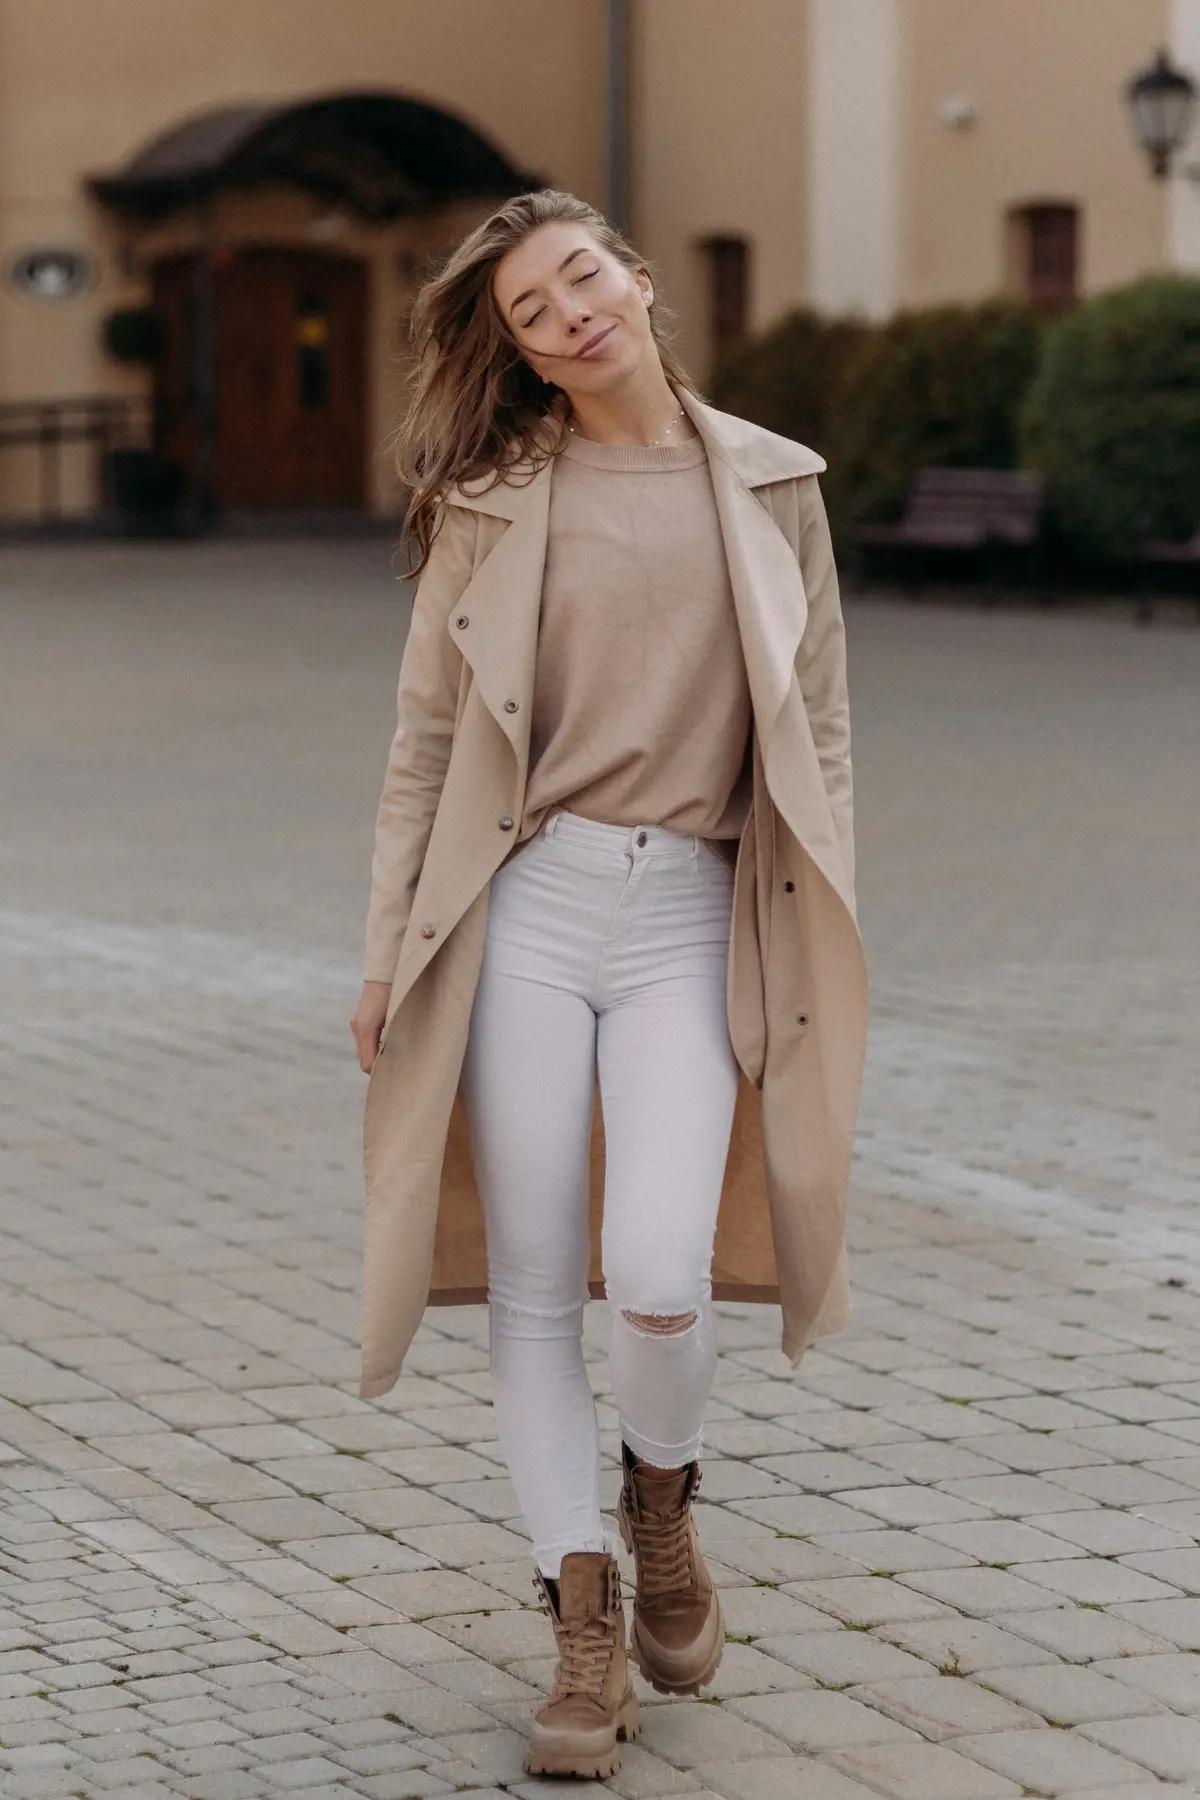 chunky brown ankle boots and white jeans